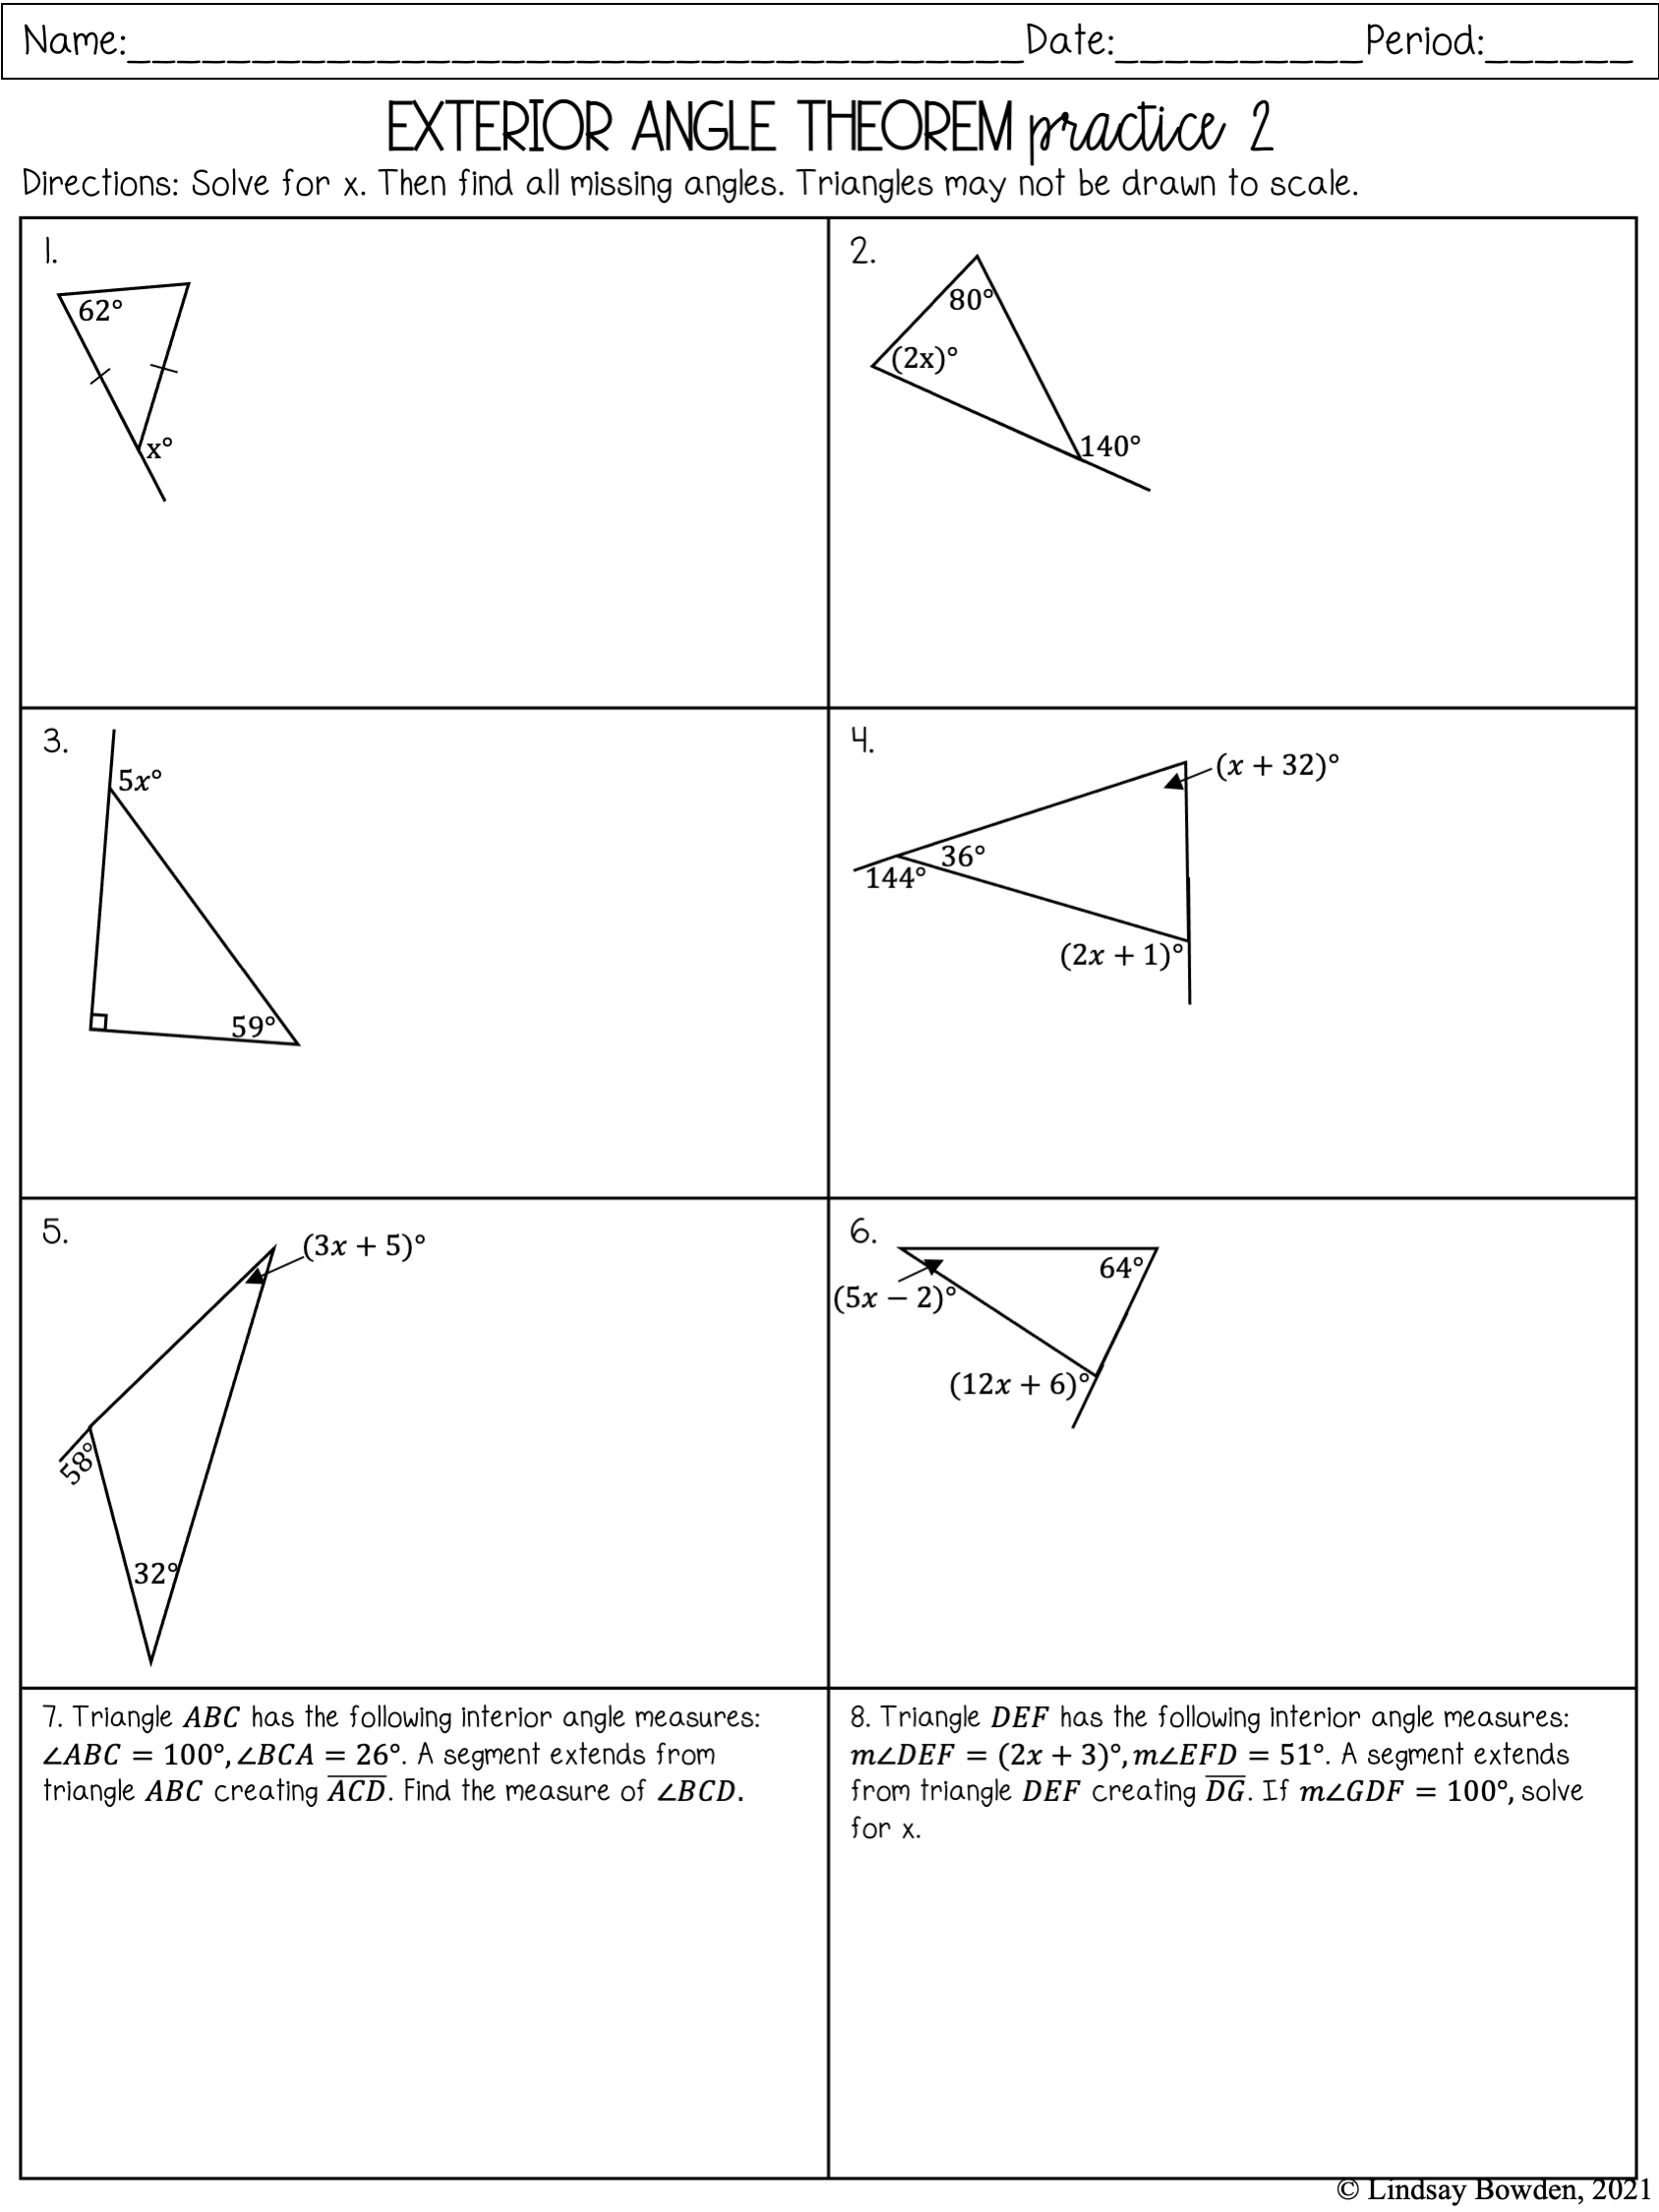 Exterior Angle Theorem Notes & Worksheets - Lindsay Bowden Pertaining To Exterior Angle Theorem Worksheet